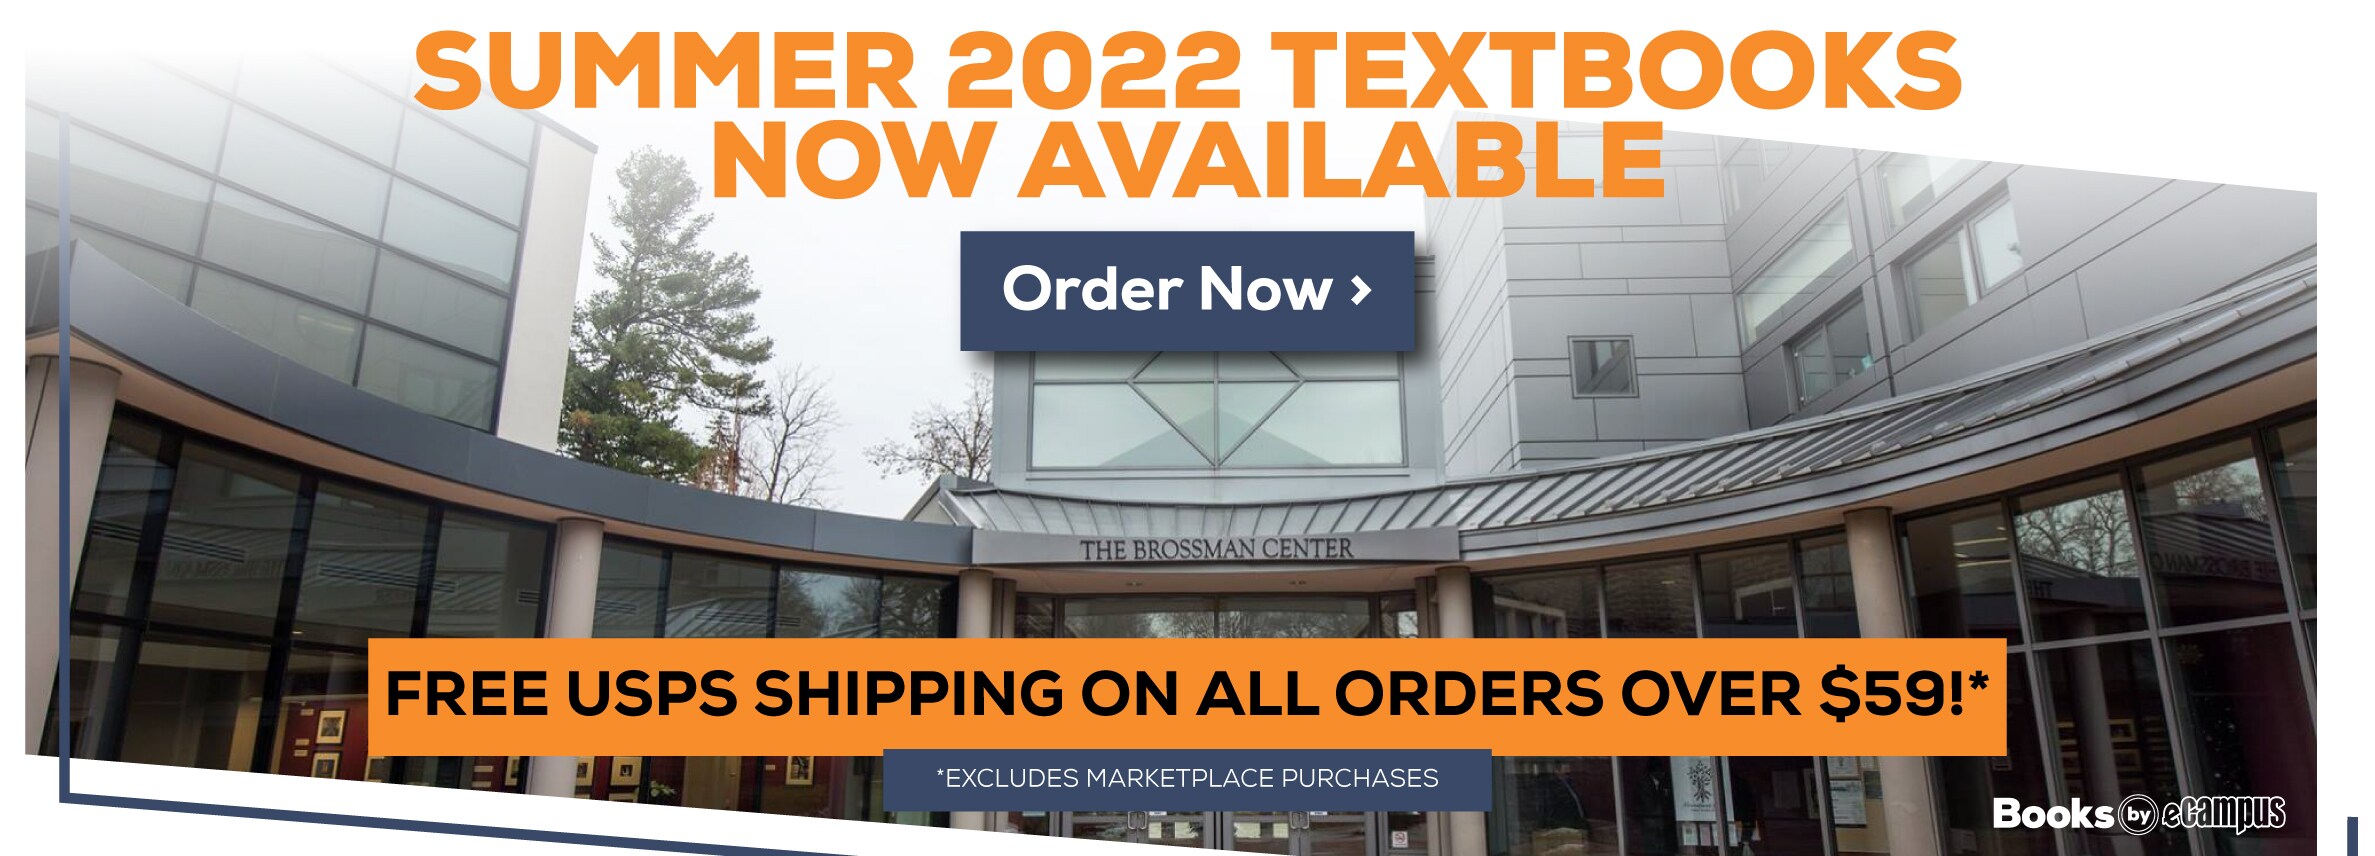 Summer 2022 Textbooks Now Available. FREE USPS SHIPPING ON ALL ORDERS OVER $59